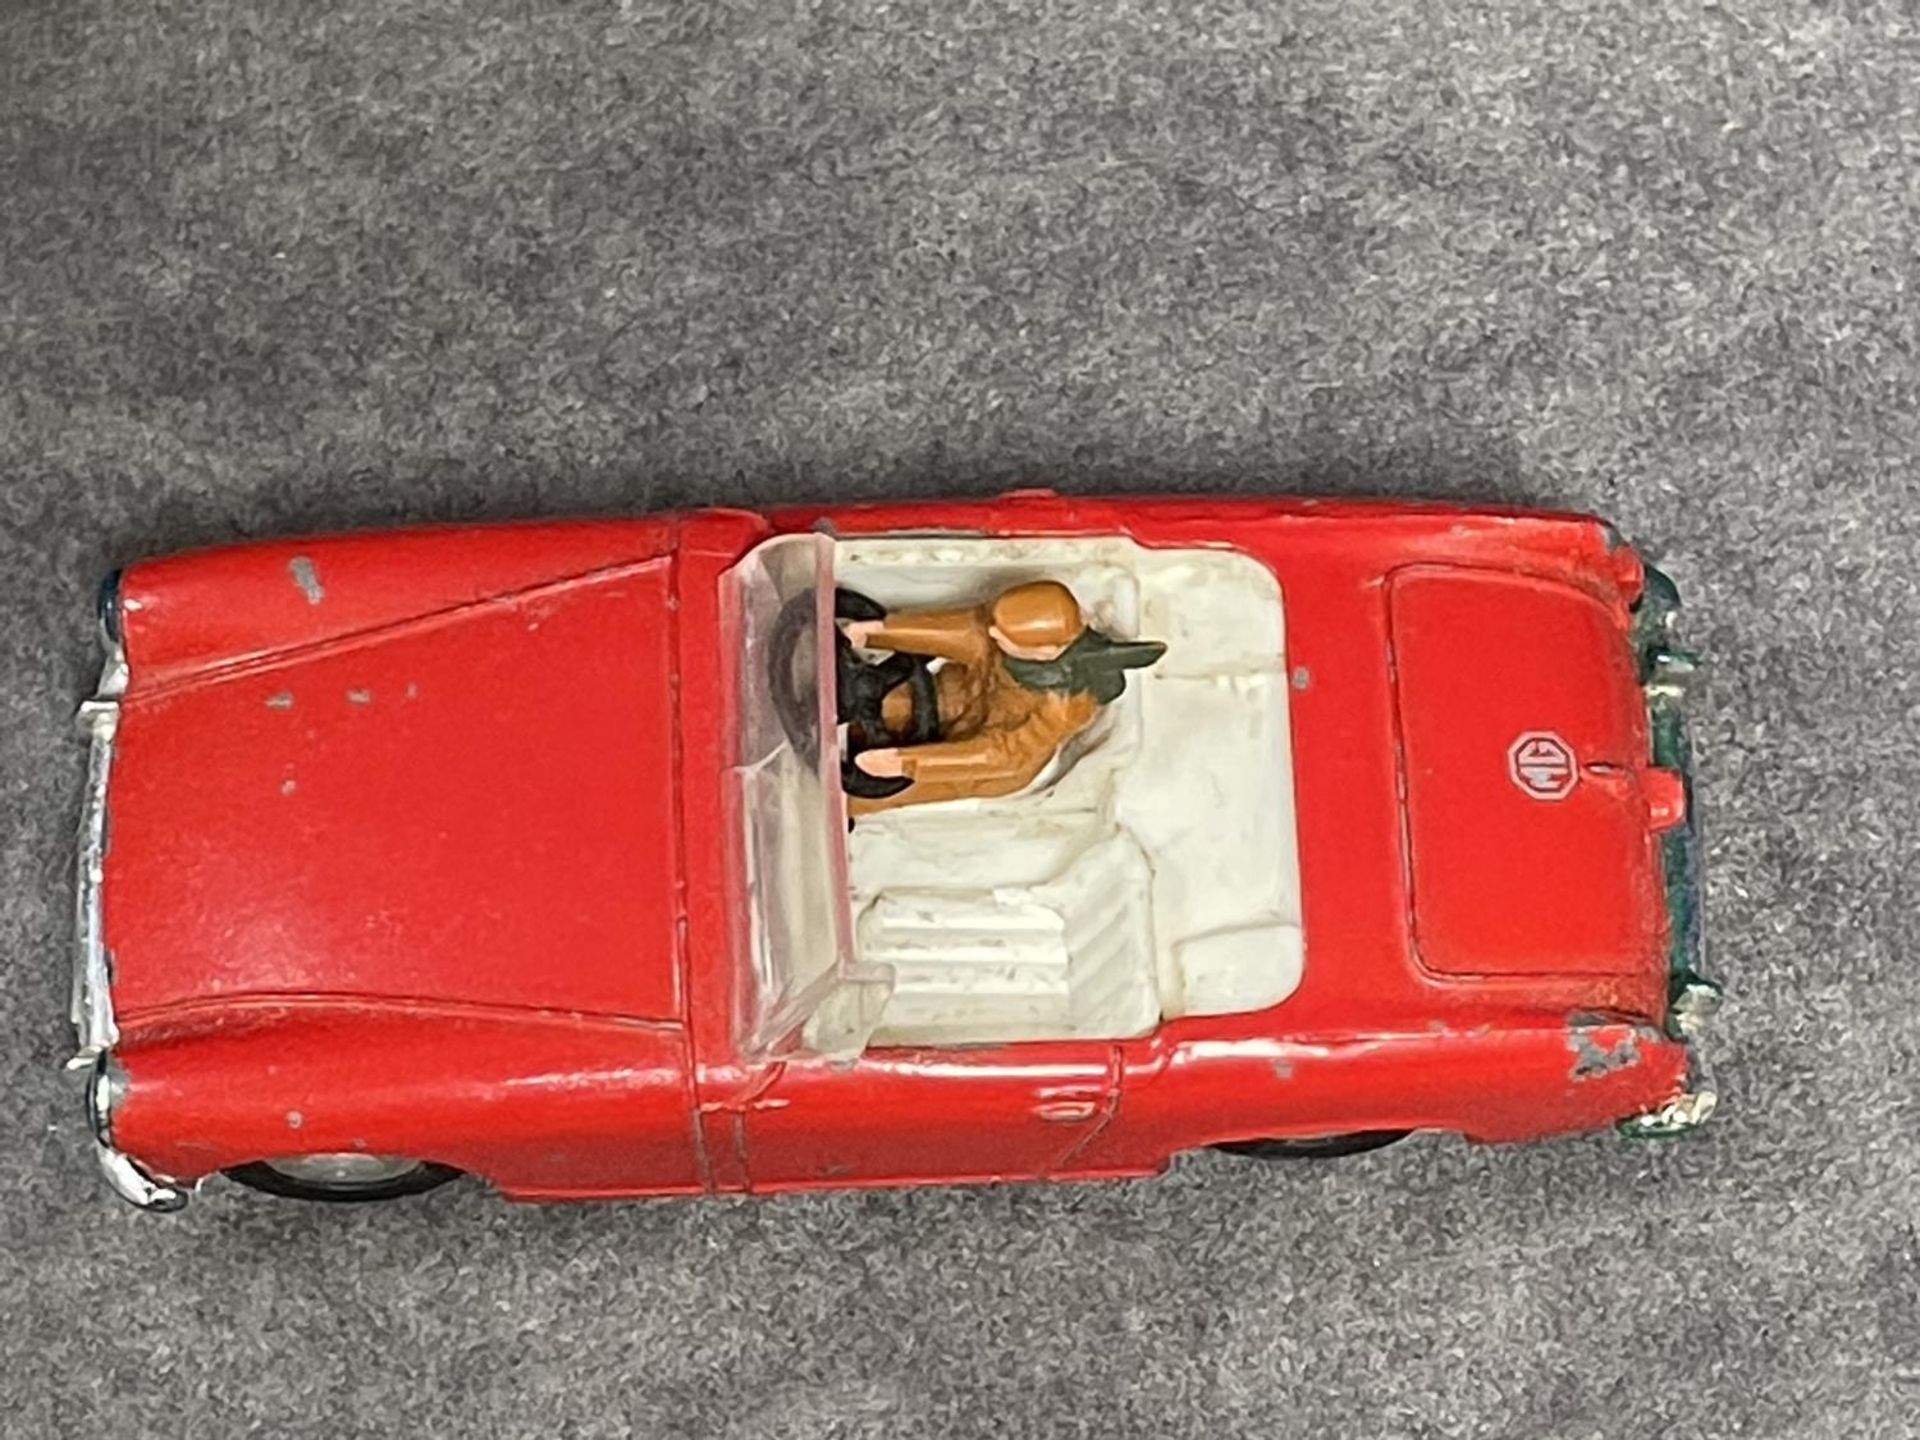 Spot-On #251 MG Midget Mark II In Red Very Good Condition Model A Few Chips Front Number Plate - Image 3 of 4